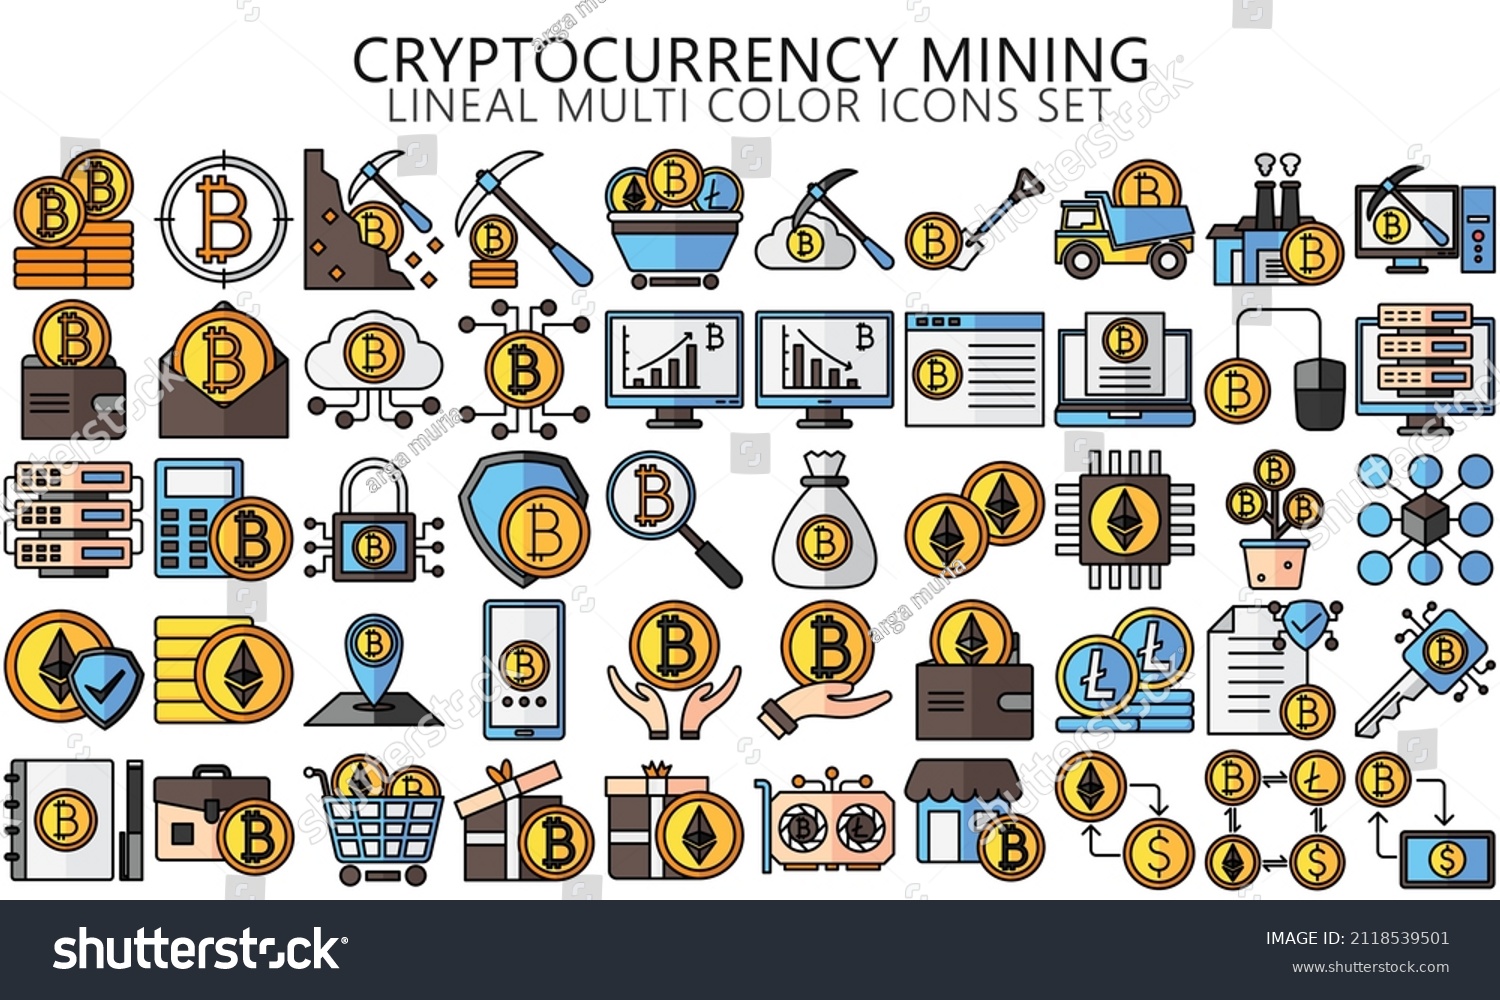 SVG of Cryptocurrency mining lineal multi color icon set. bitcoin, ethereum, fintech pictograms for web and mobile app GUI. Blockchain technology simple UI, UX vector icons, EPS 10 ready convert to SVG svg